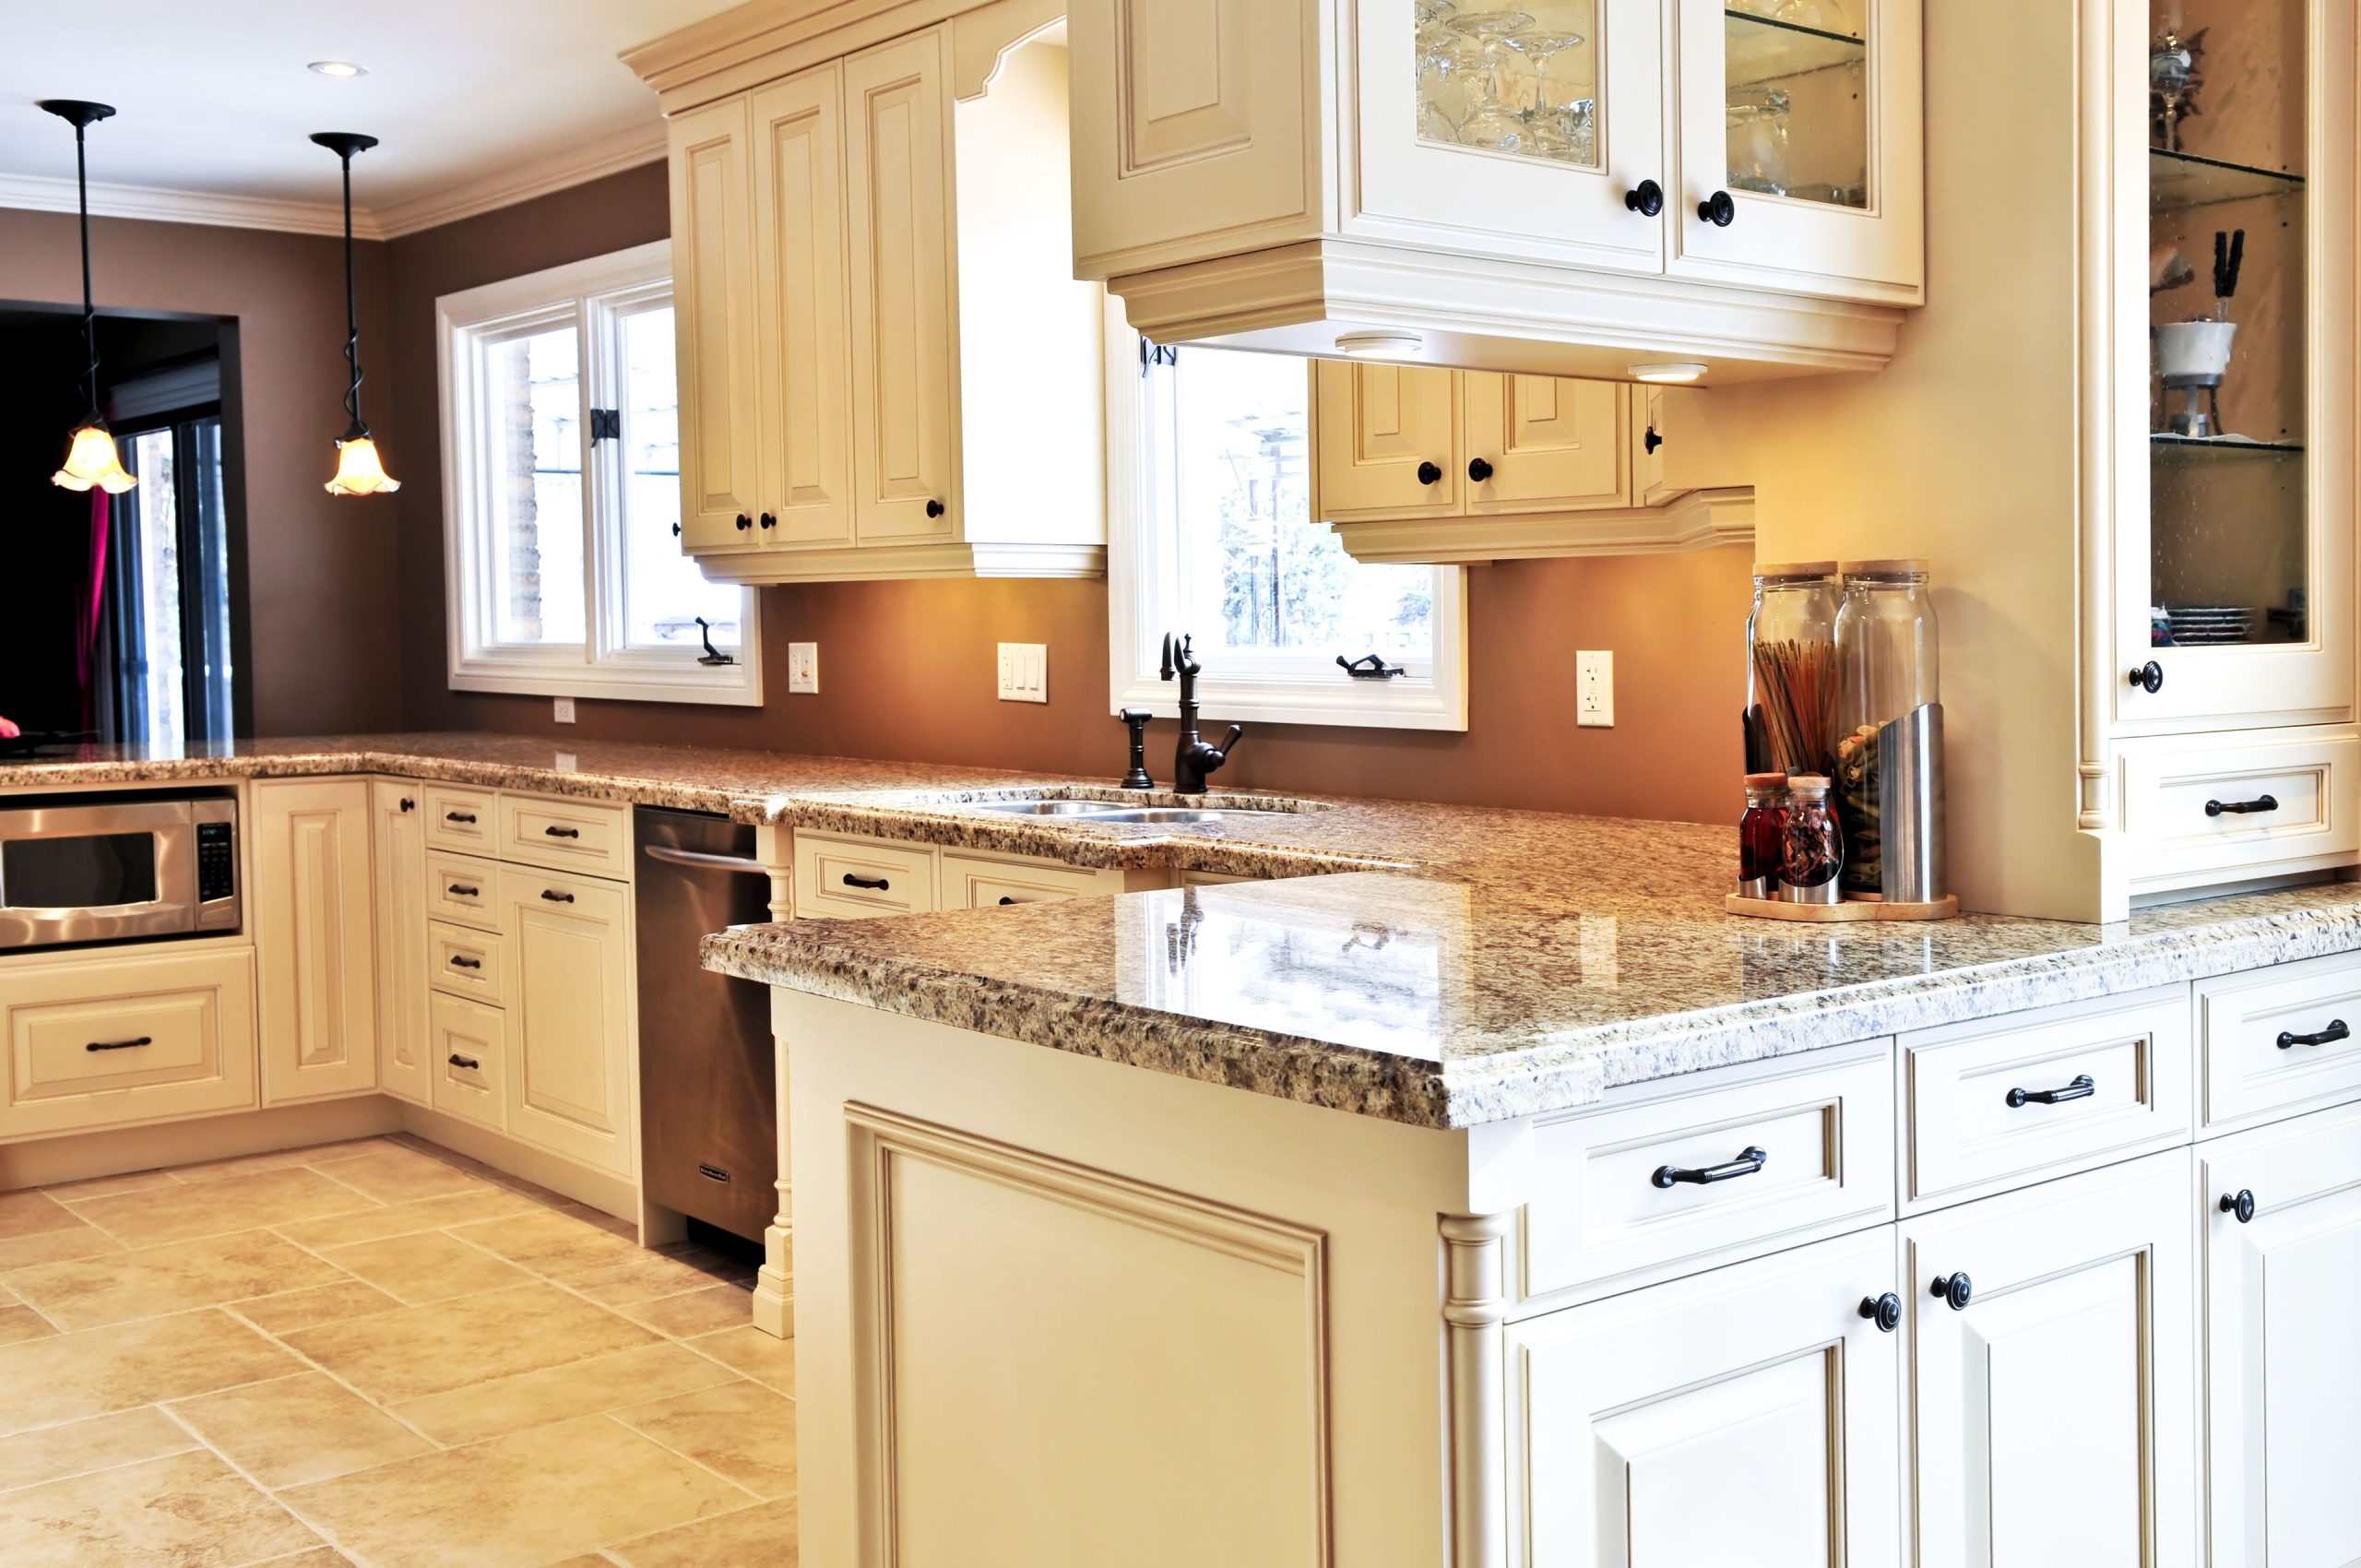 More Space for Entertaining with Kitchen Remodeling in West Hempstead, NY